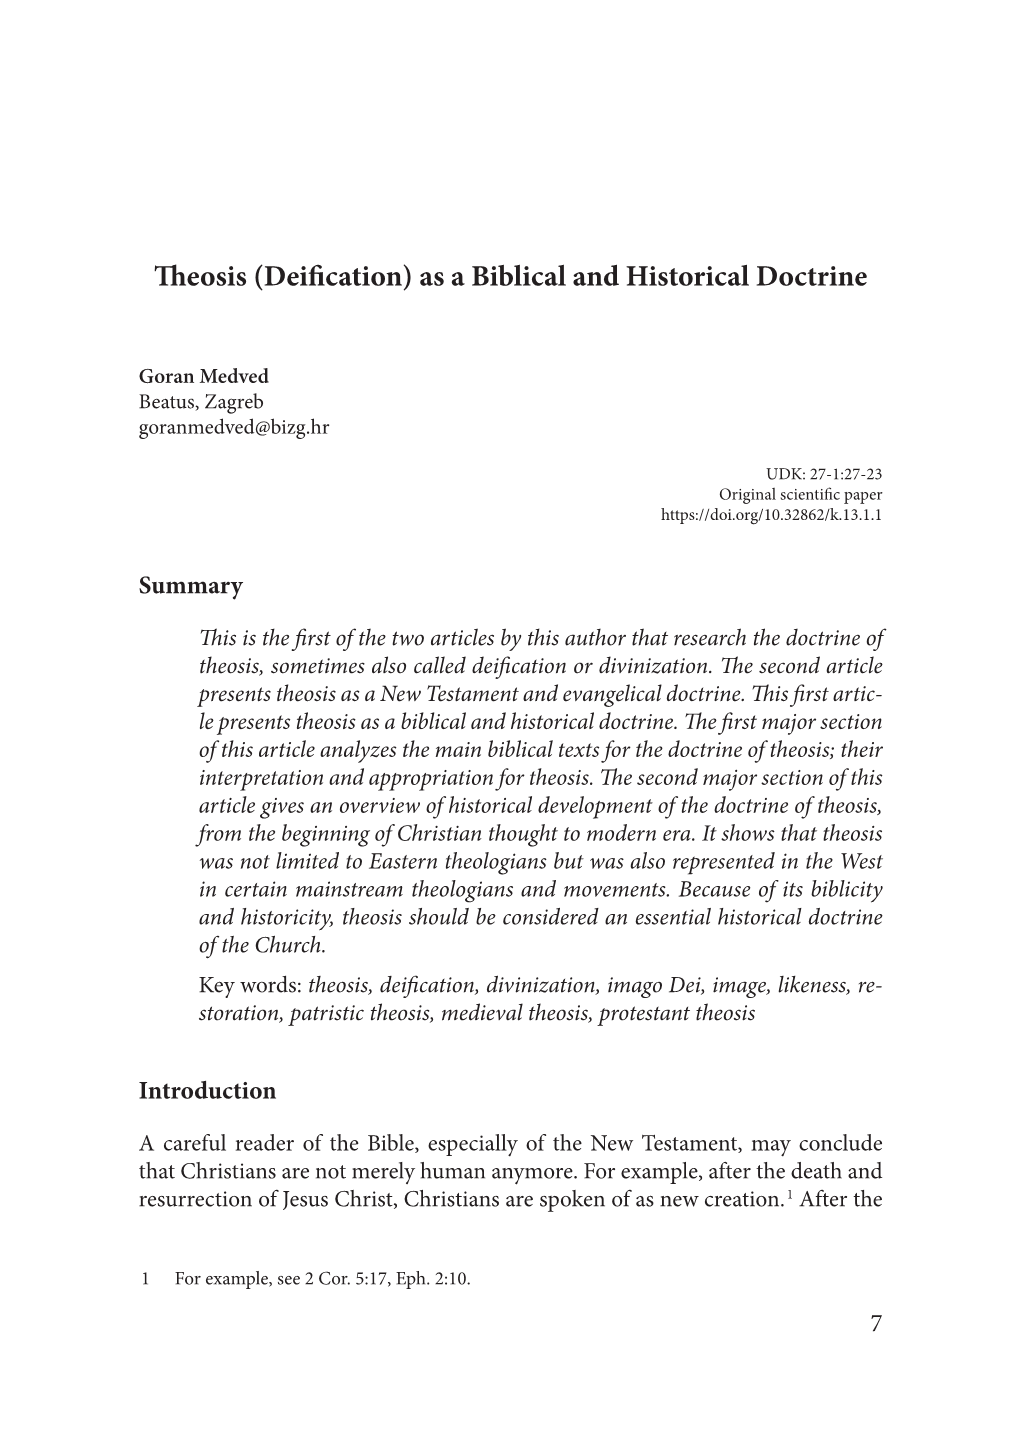 Theosis (Deification) As a Biblical and Historical Doctrine